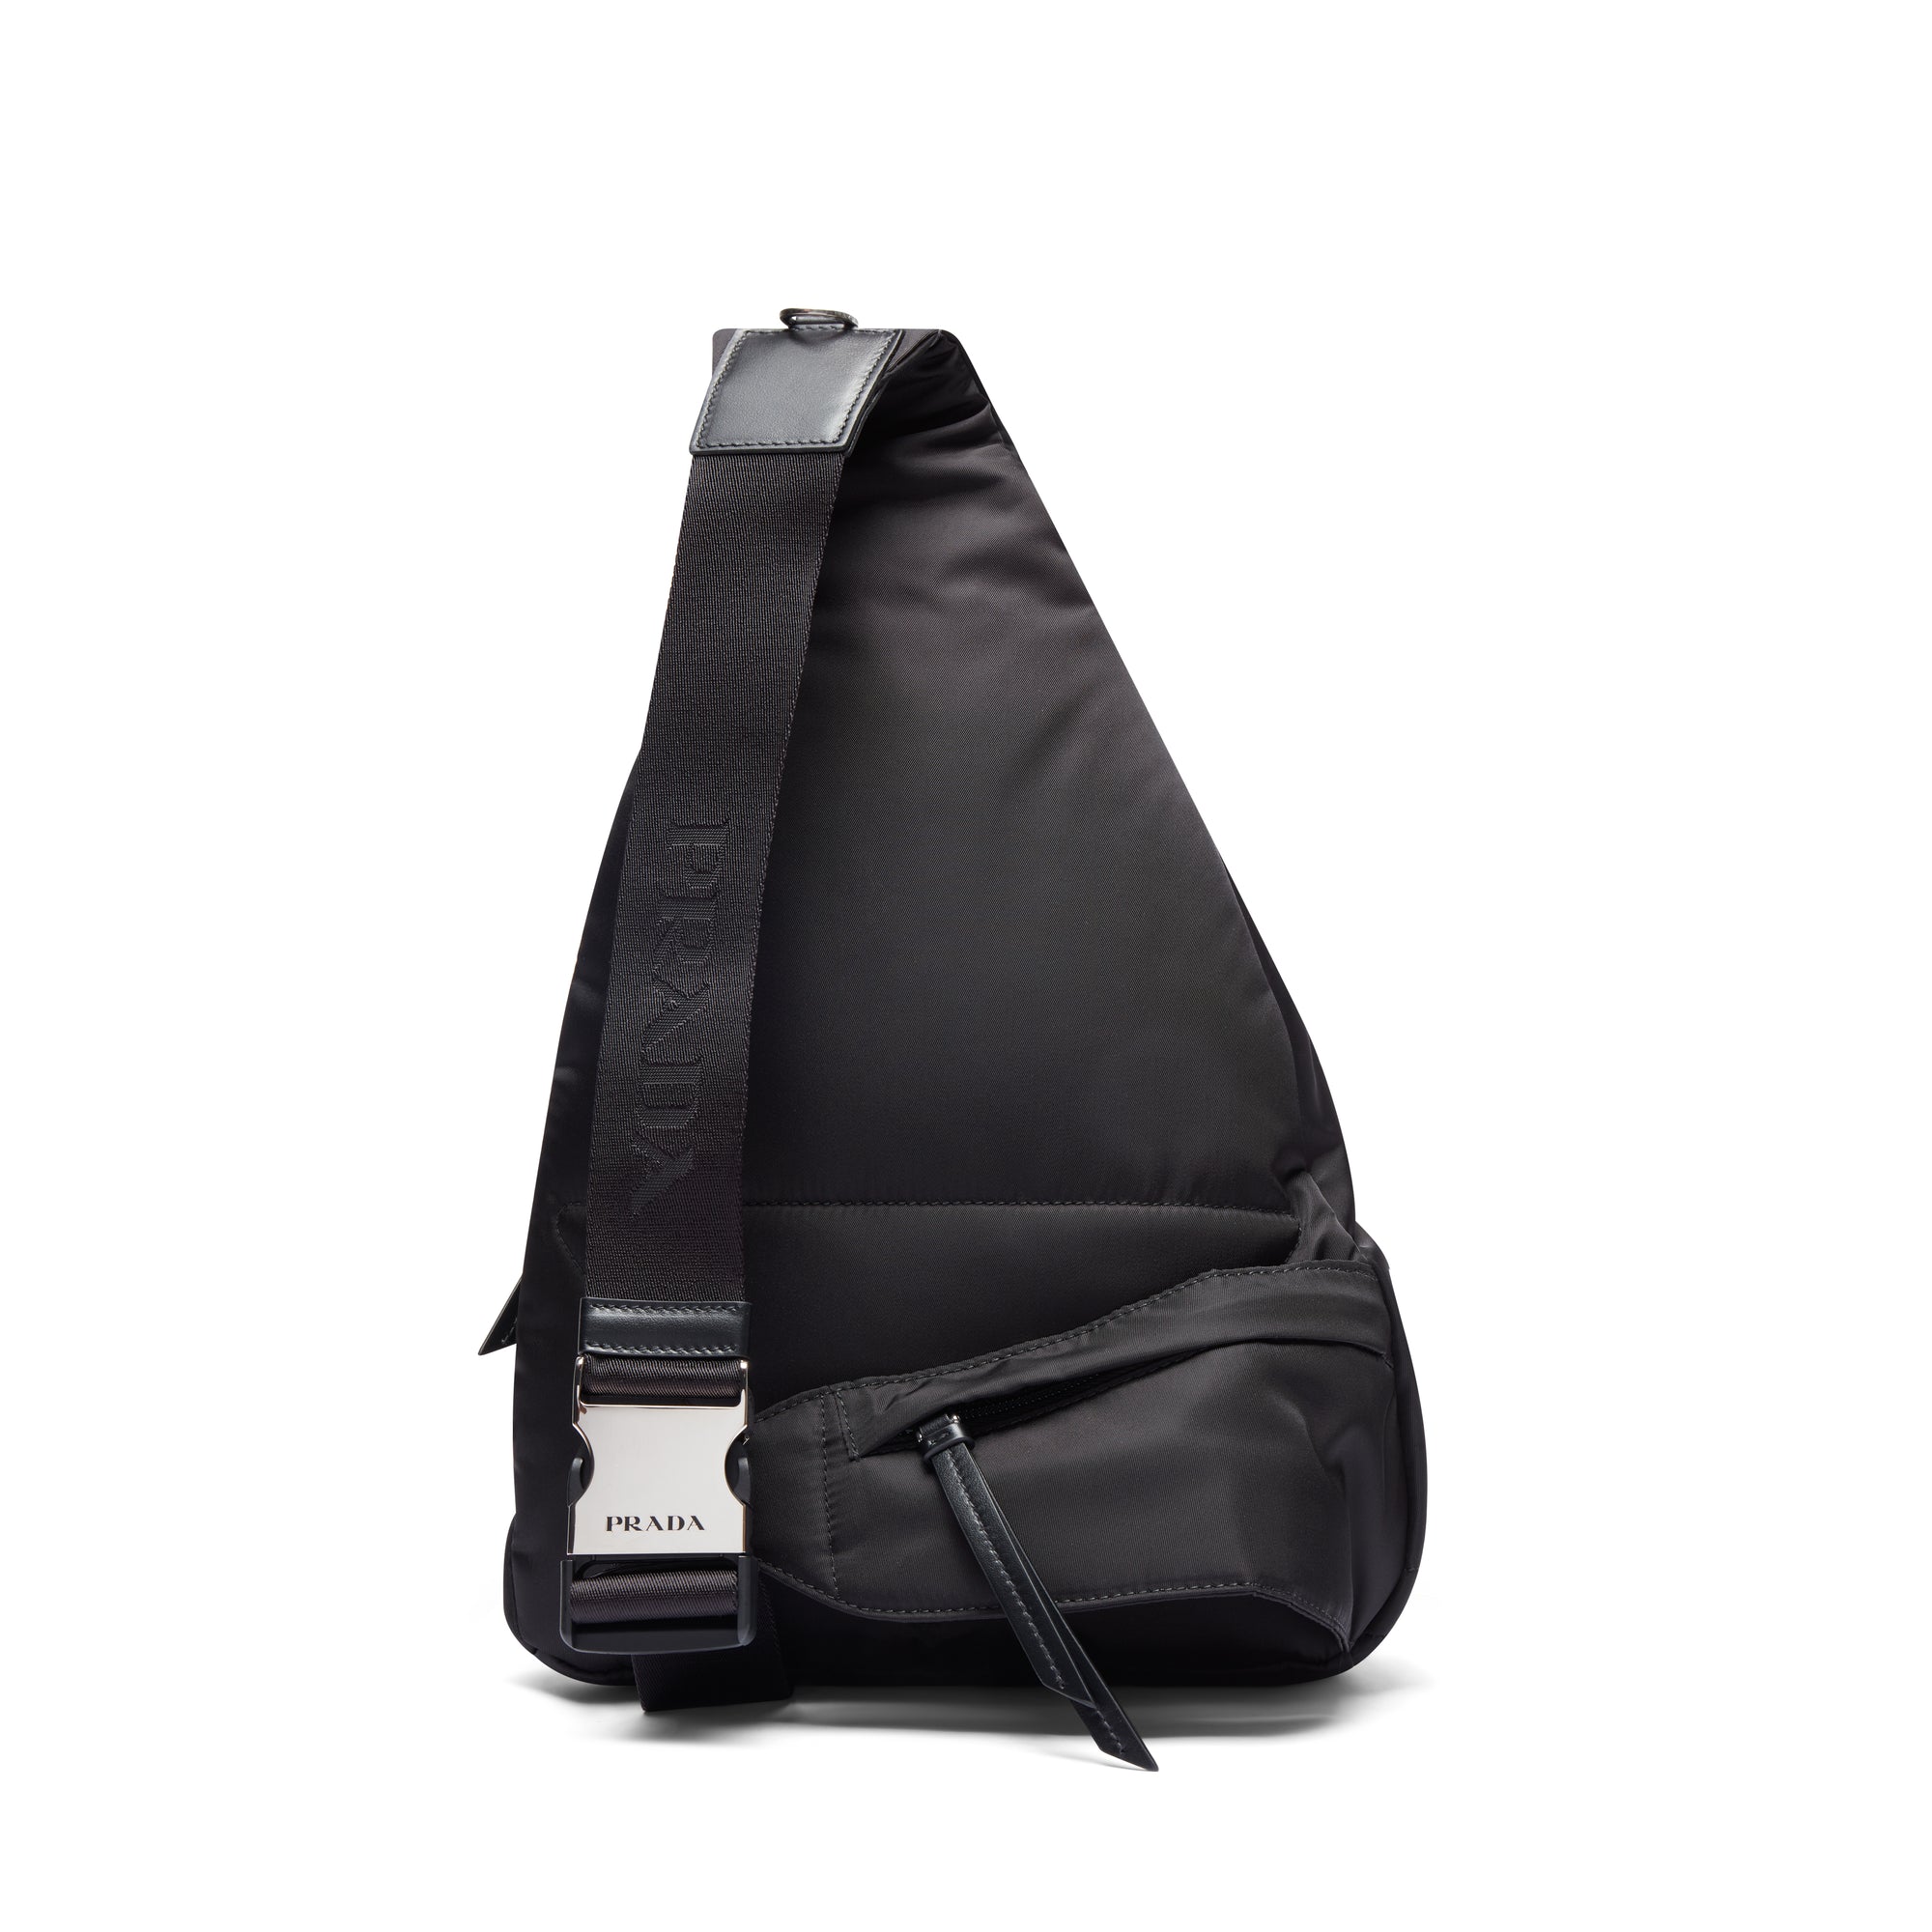 Prada - Men’s Re-Nylon and Leather Backpack - (Black) view 3